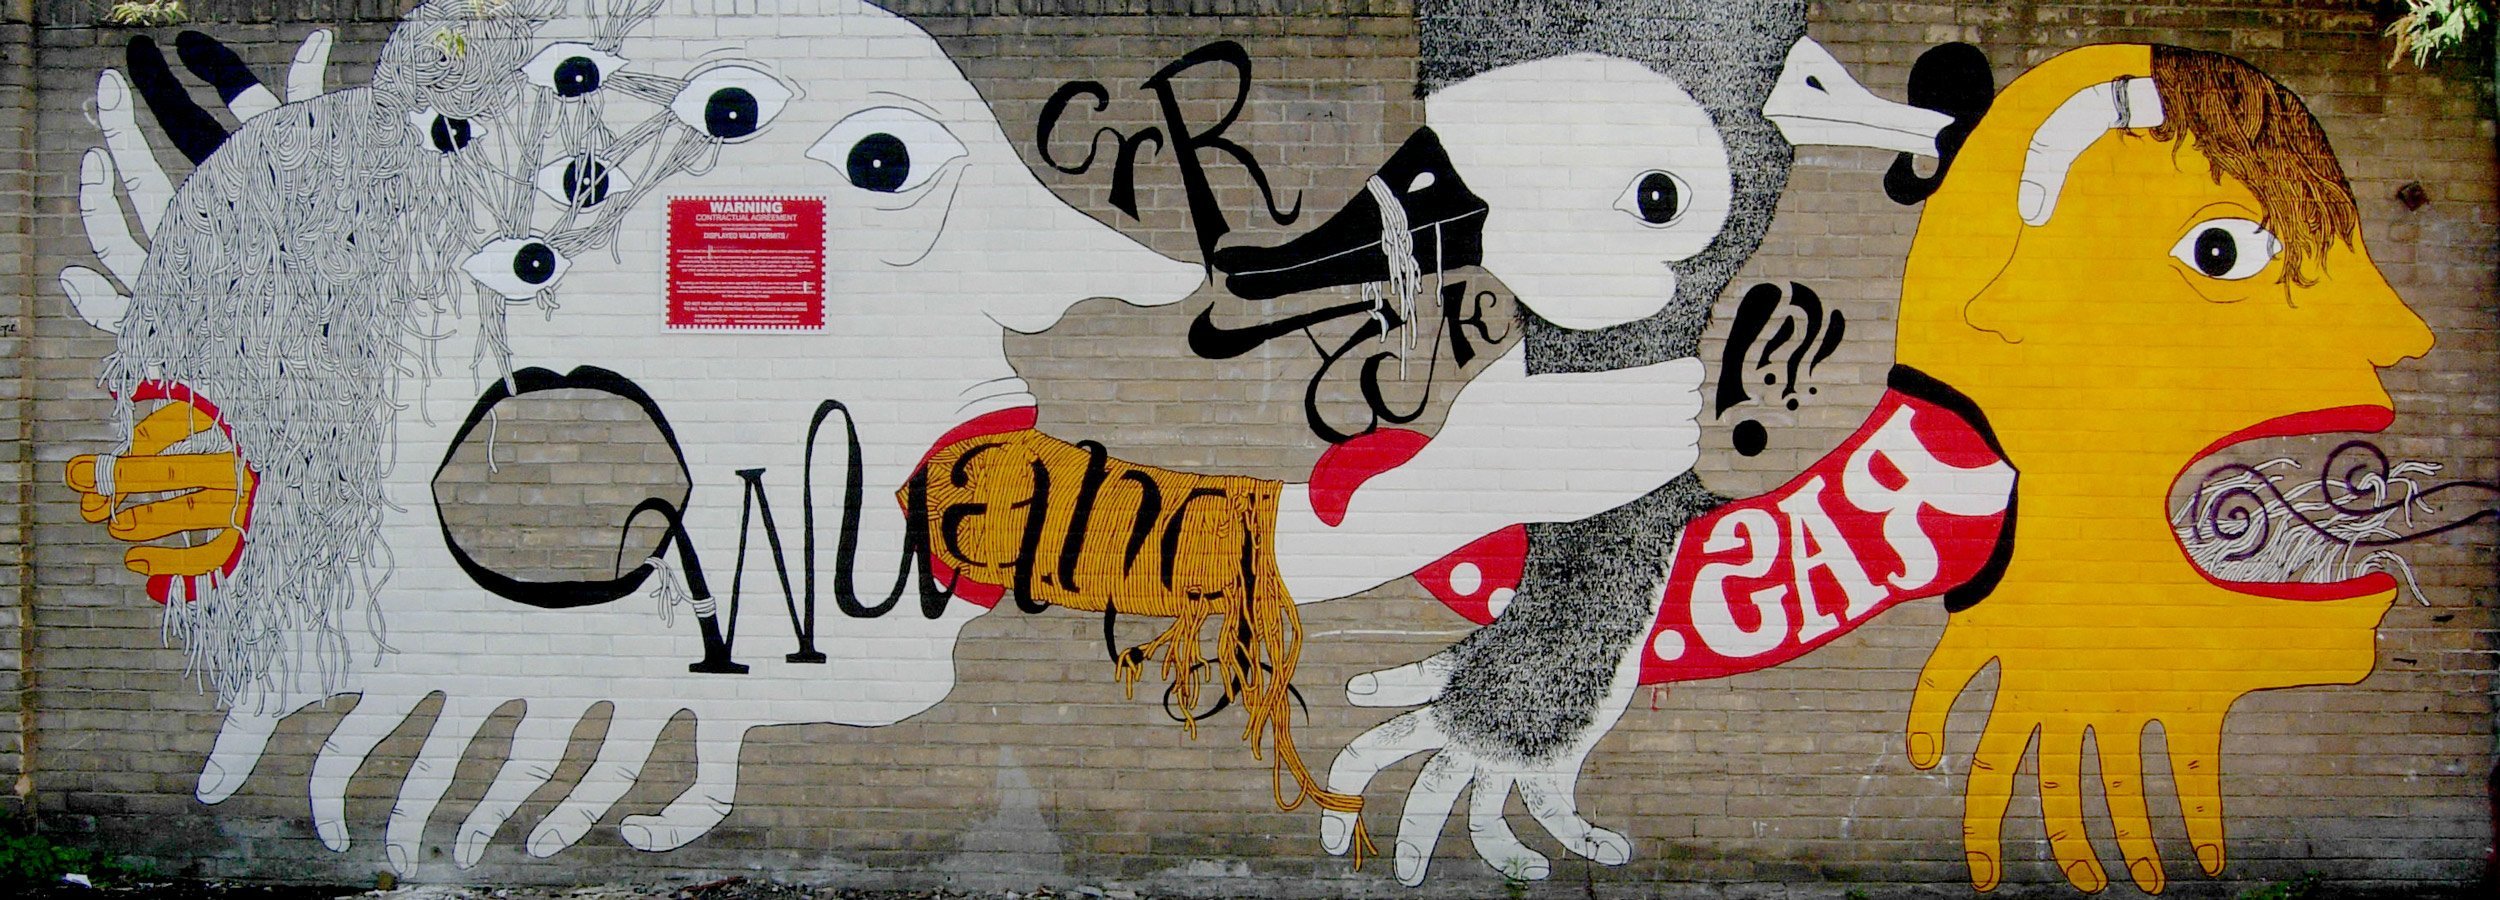 Paper Dreams, 8.40 x 3.20 m wall painted in Abbot St in 2009